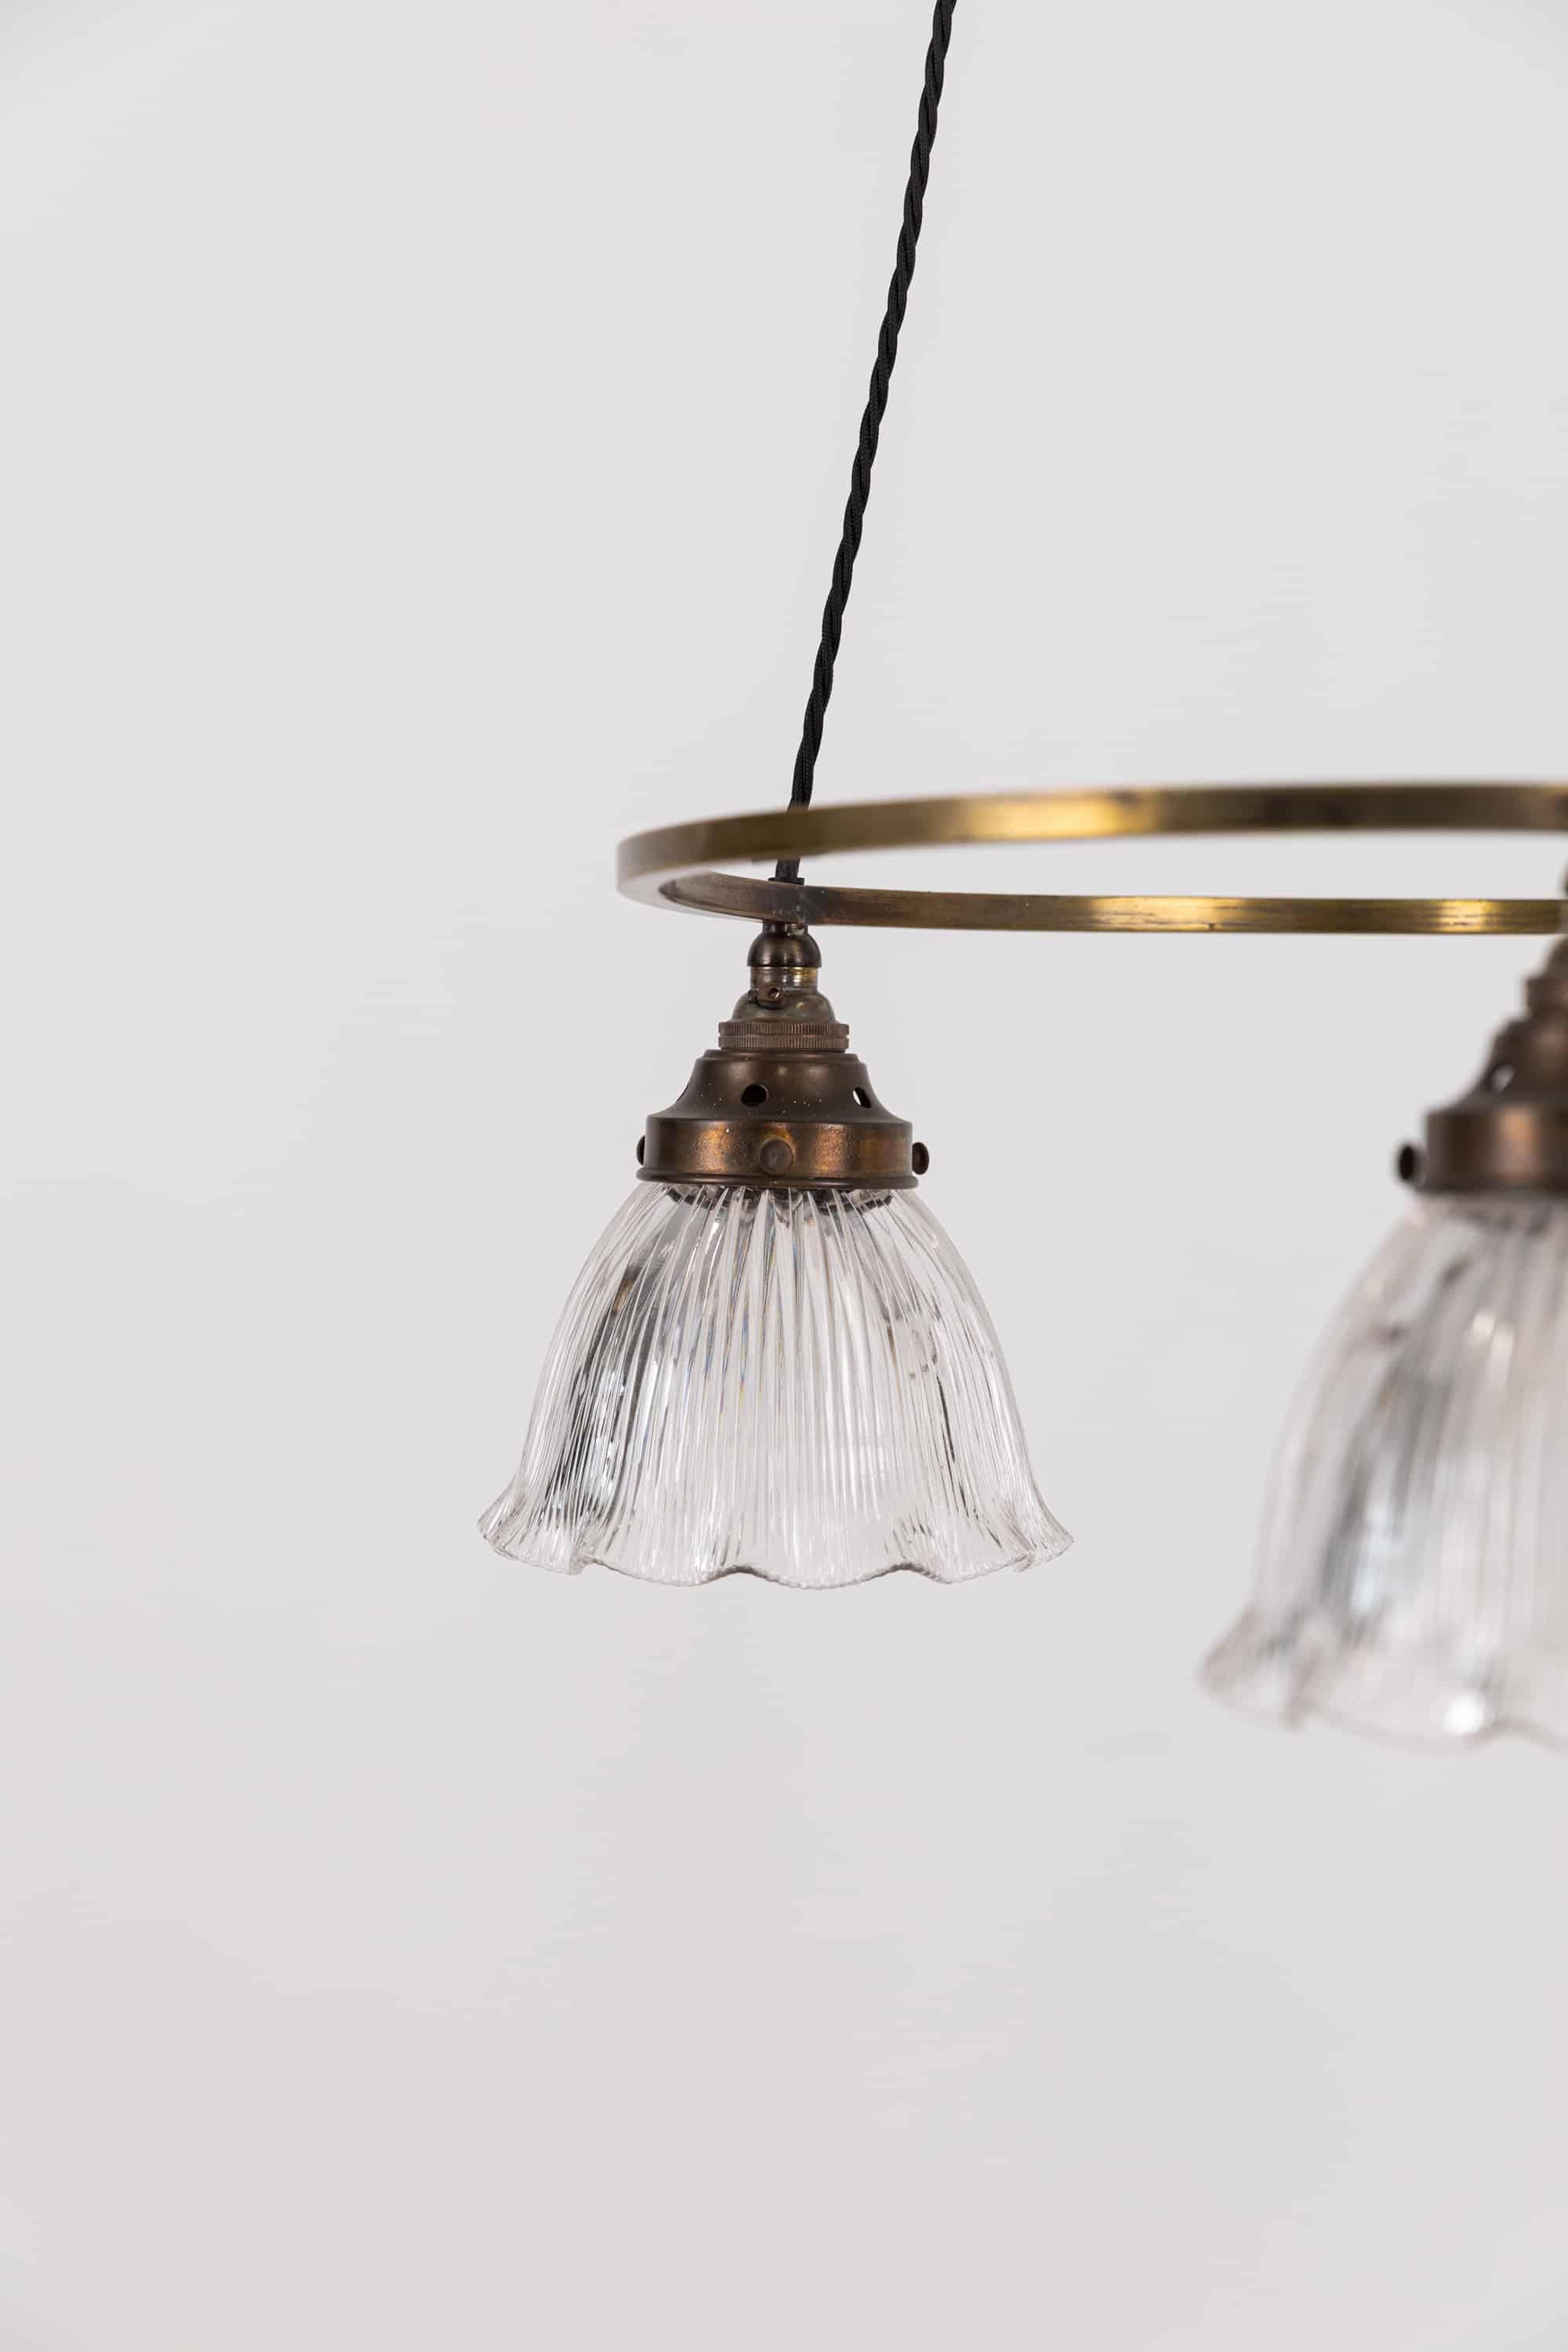 A very elegantly formed cluster light by in England by Holophane. circa.1920

Comprising of brass ring supporting three prismatic glass Holophane 'Stiletto' shades. Super decorative ceiling plate allows the flex to support the weight below and